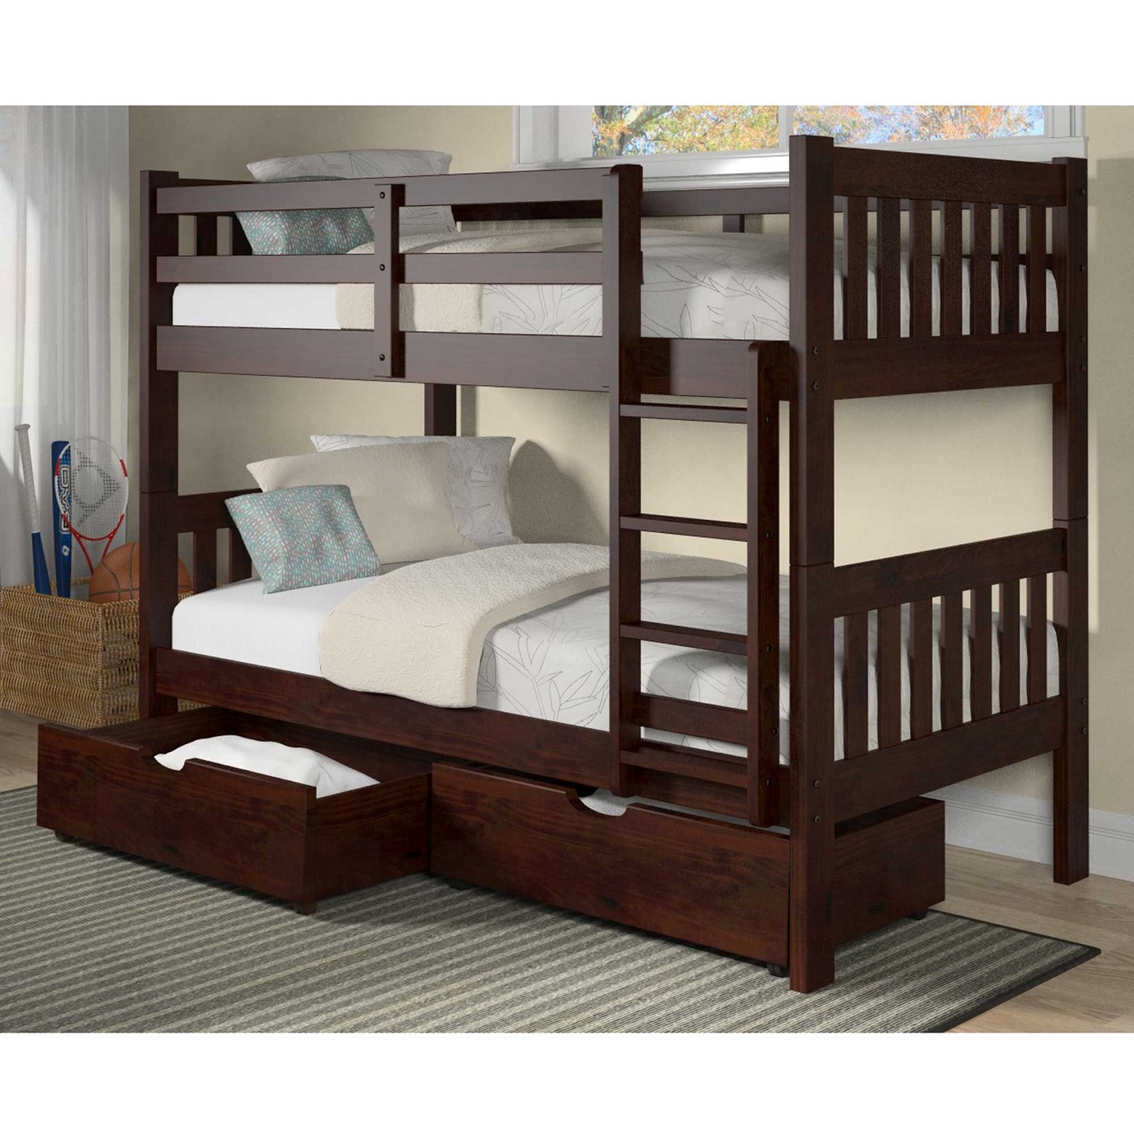 Masion Twin Over Mission Bunk Bed, Chelsea Home Bunk Bed